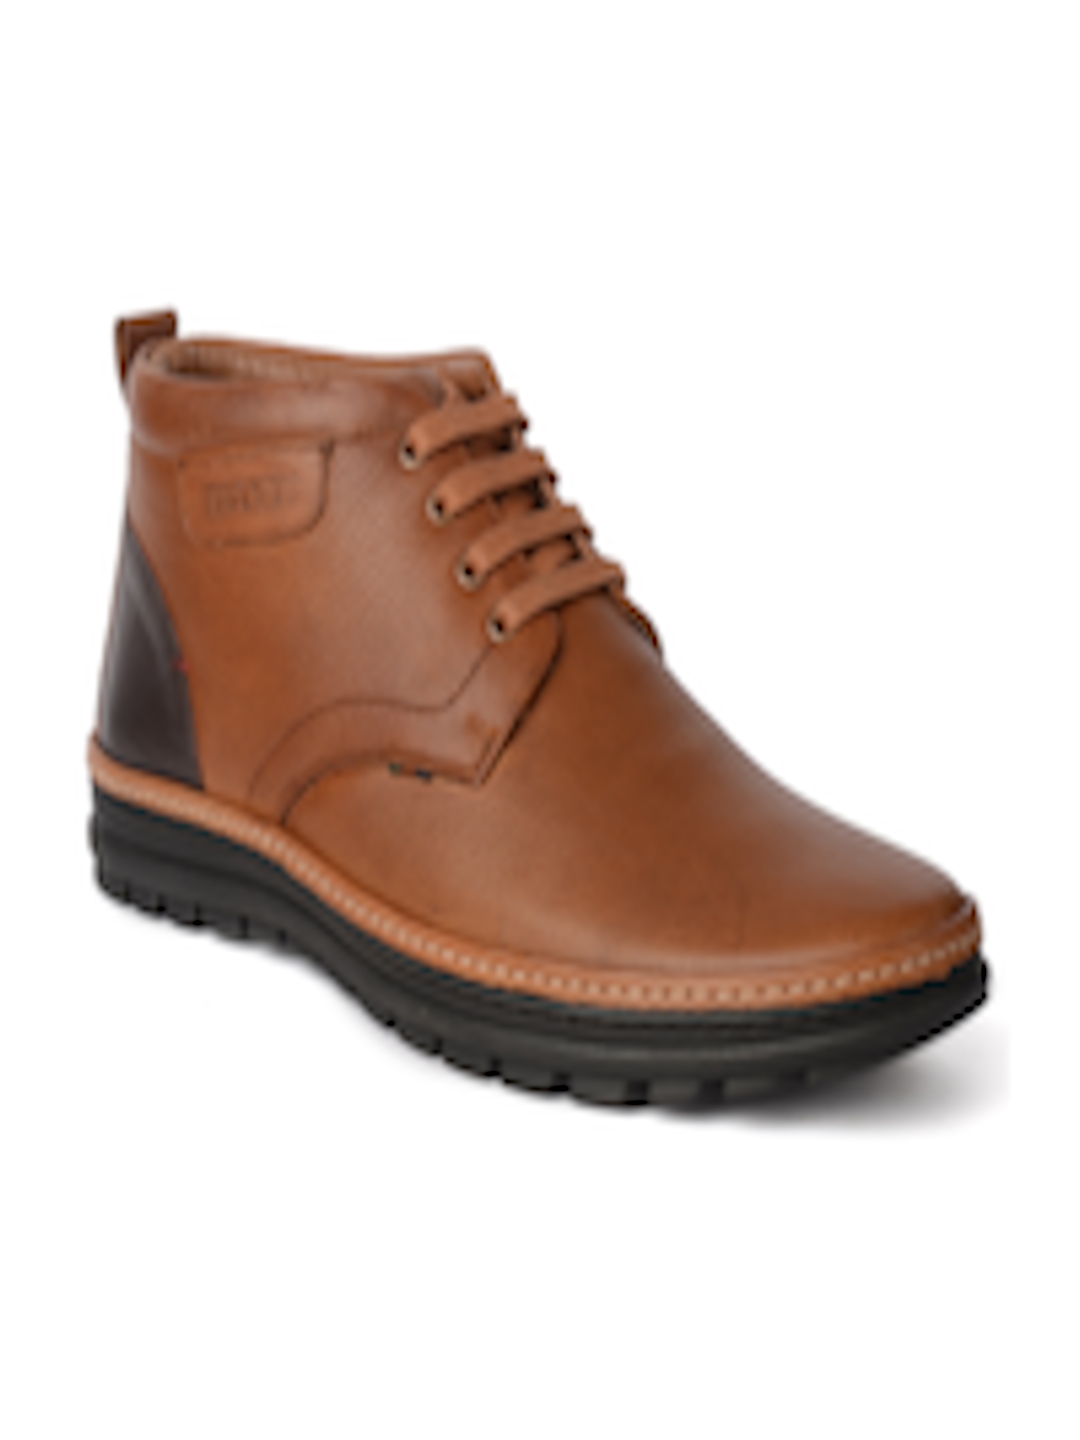 Buy Buckaroo Men Tan Genuine Leather Boots - Casual Shoes for Men ...